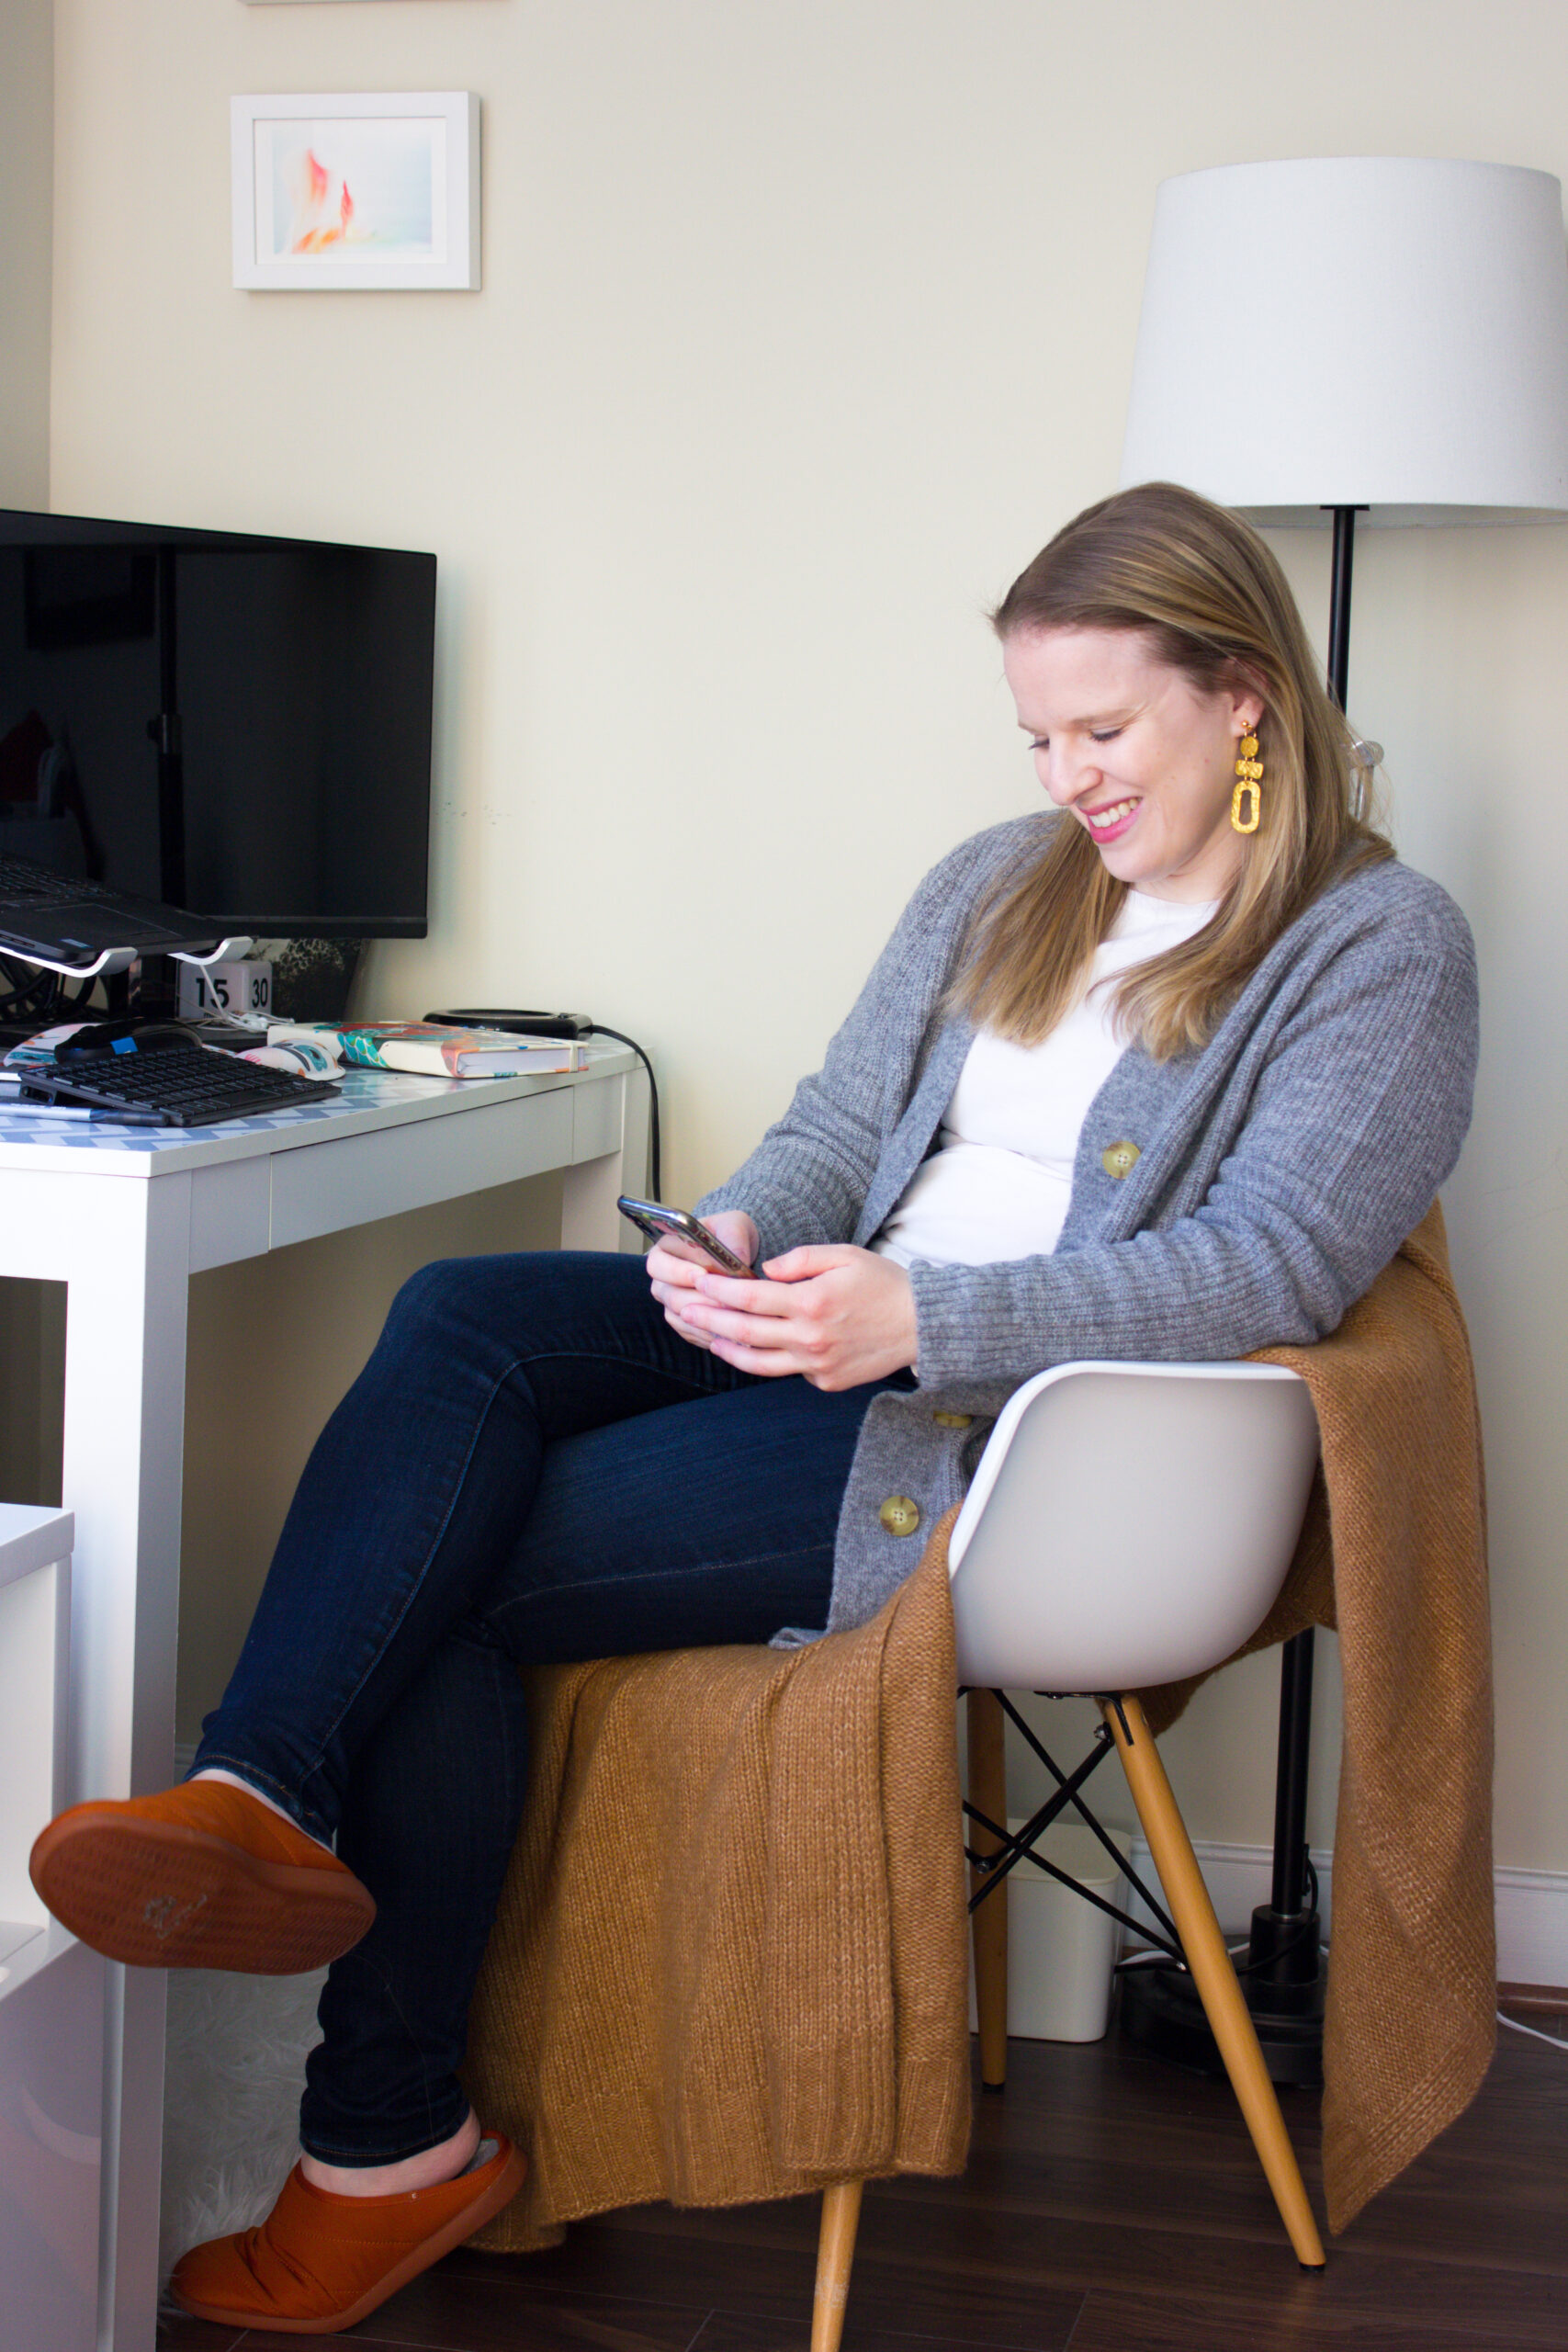 Week Whatever of Quarantine Vol 11 | woman blogger working from home wearing Everlane cardigan